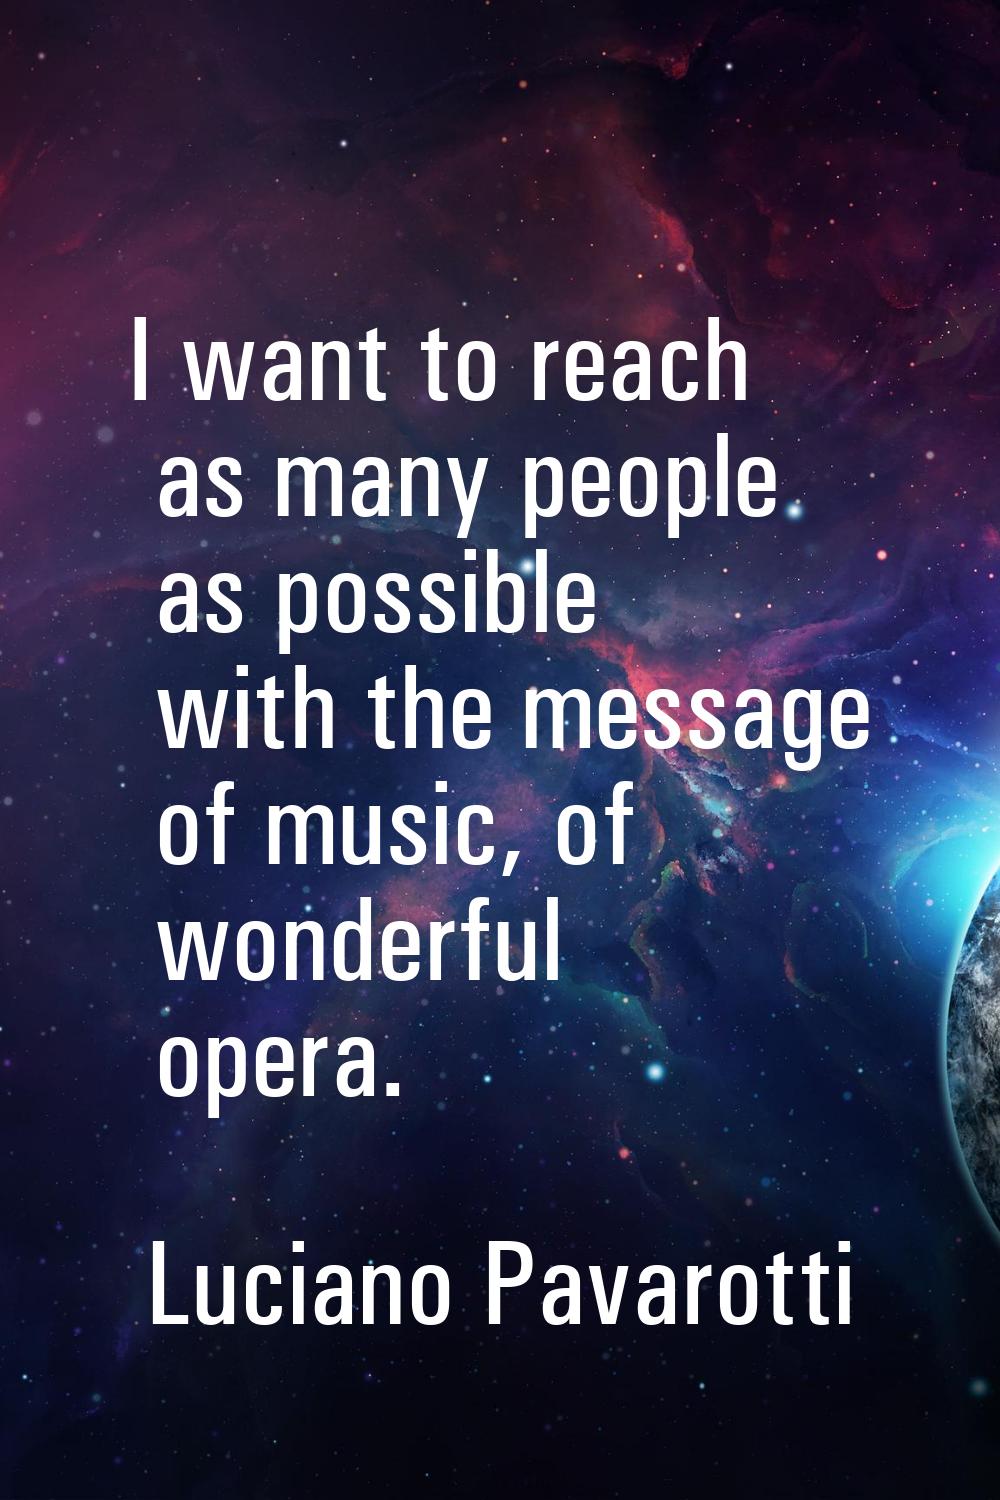 I want to reach as many people as possible with the message of music, of wonderful opera.